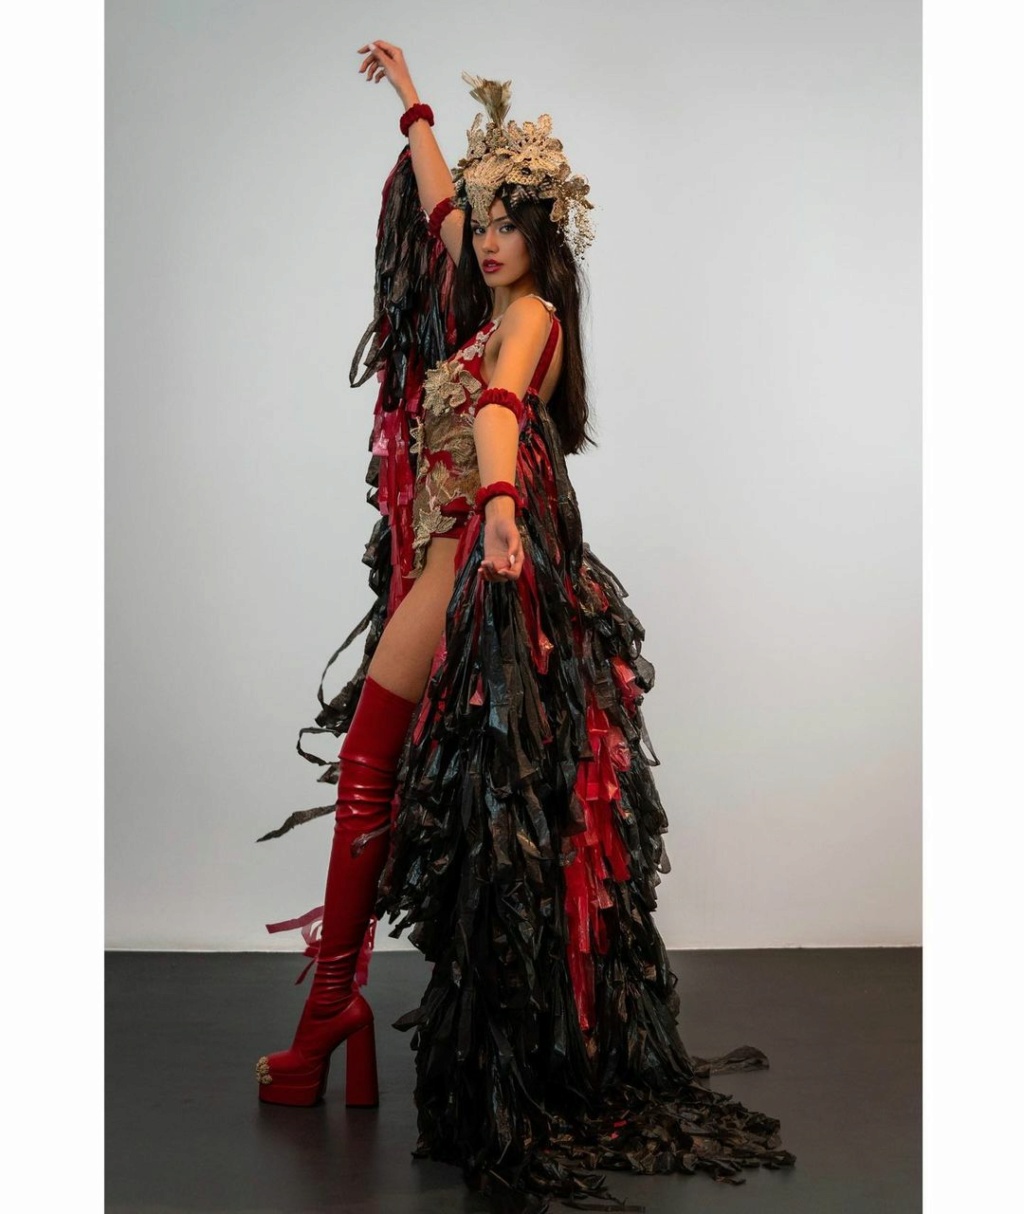  ♔ MISS UNIVERSE 2022 - NATIONAL COSTUME  ♔ - Page 2 32350113